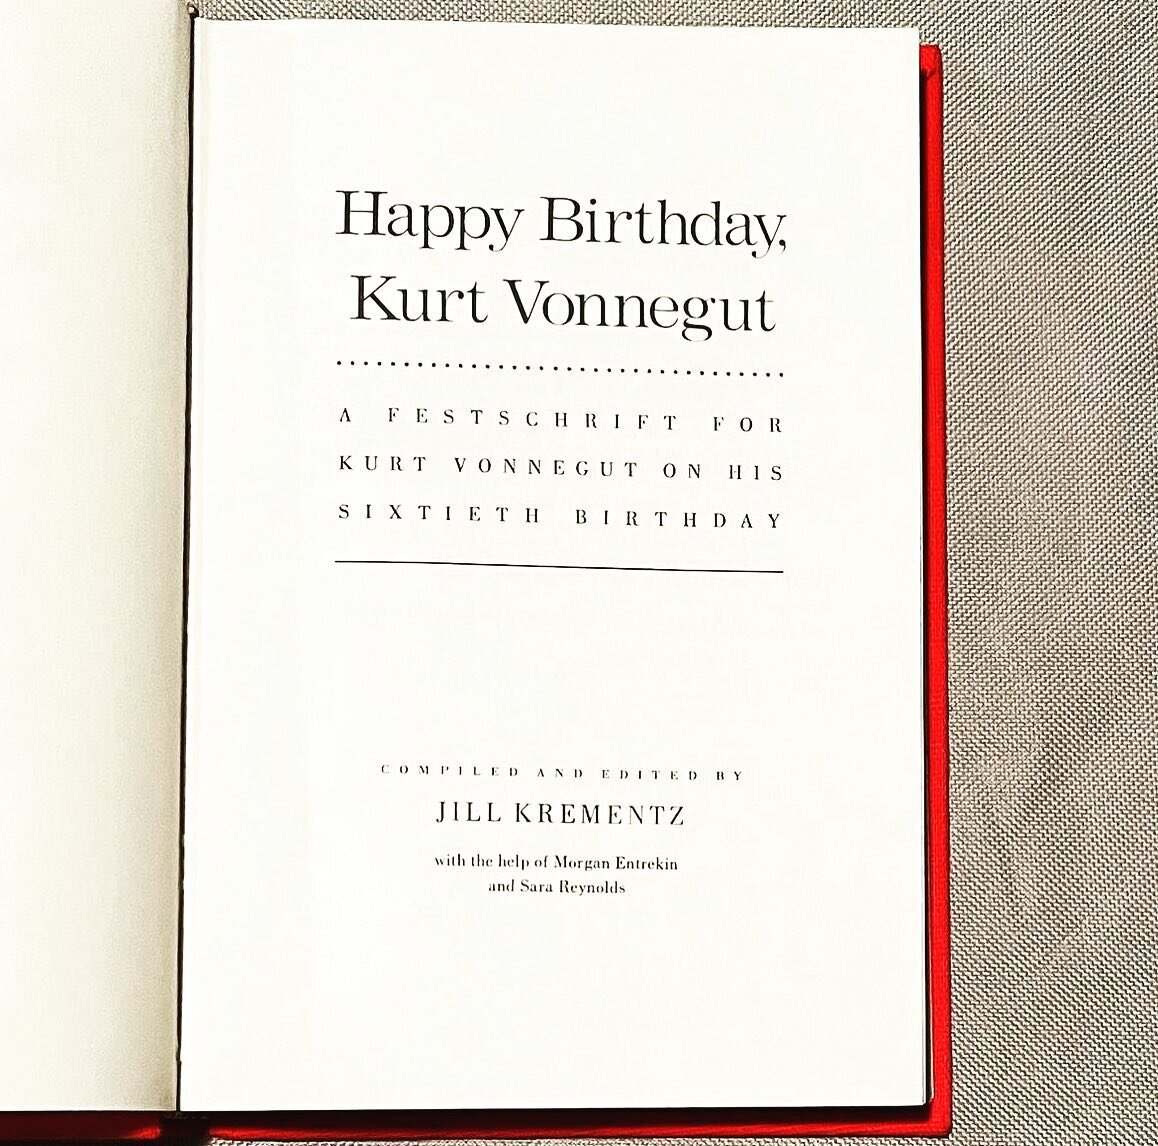 📚👨🏻🎂🥳
𝑯𝒂𝒑𝒑𝒚 𝑩𝒊𝒓𝒕𝒉𝒅𝒂𝒚, 𝑲𝒖𝒓𝒕 𝑽𝒐𝒏𝒏𝒆𝒈𝒖𝒕 &mdash; Special Edition First Printing Hardcover &mdash; Delacorte Press, 1982

Today would have been Vonnegut&rsquo;s 100th birthday! In 1982, his wife had this book put together for 